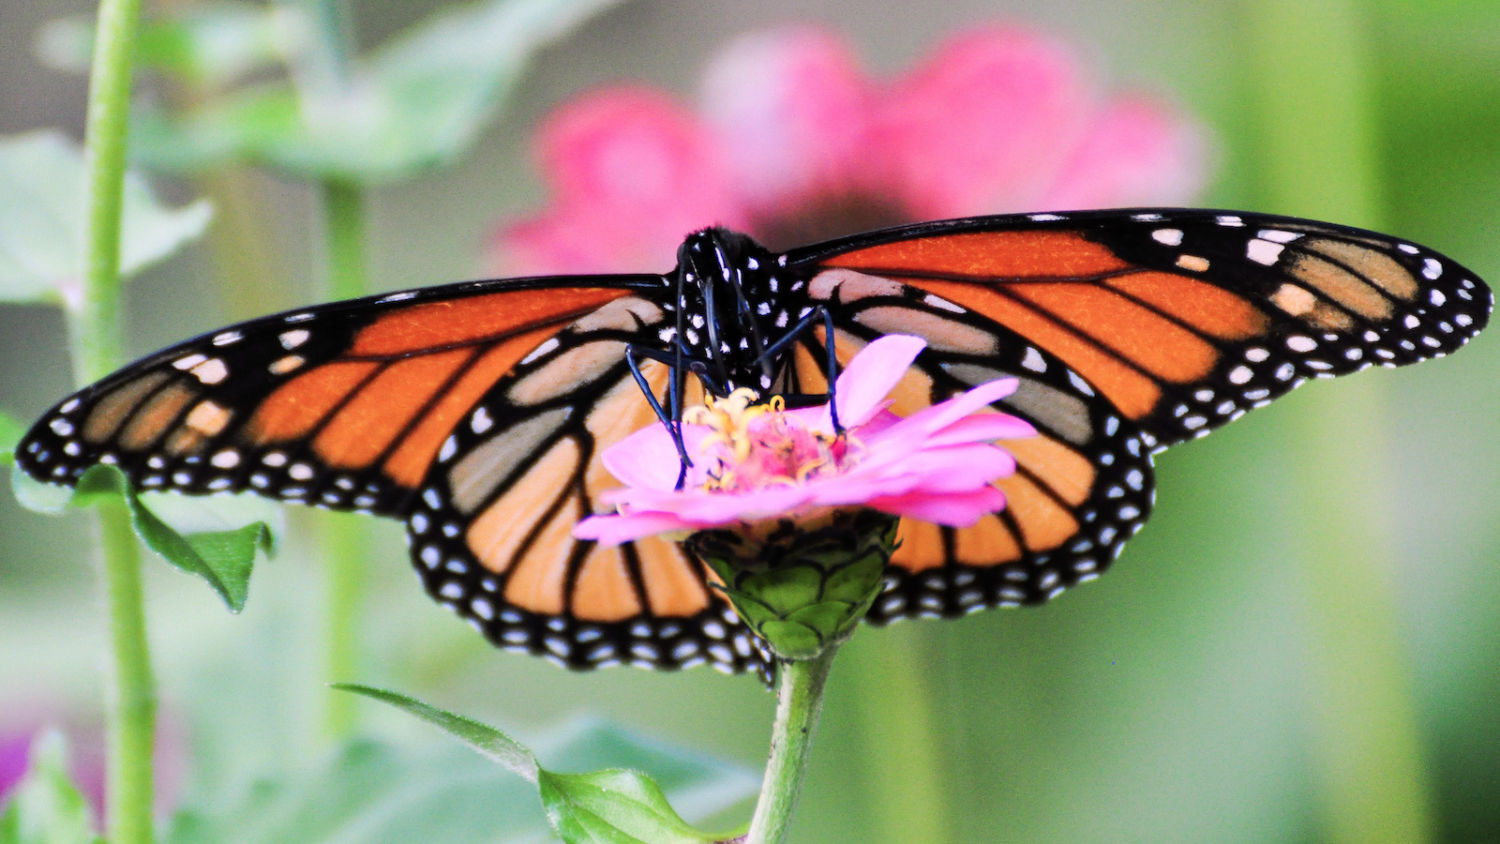 Are monarch butterflies really in peril? A closer look at the